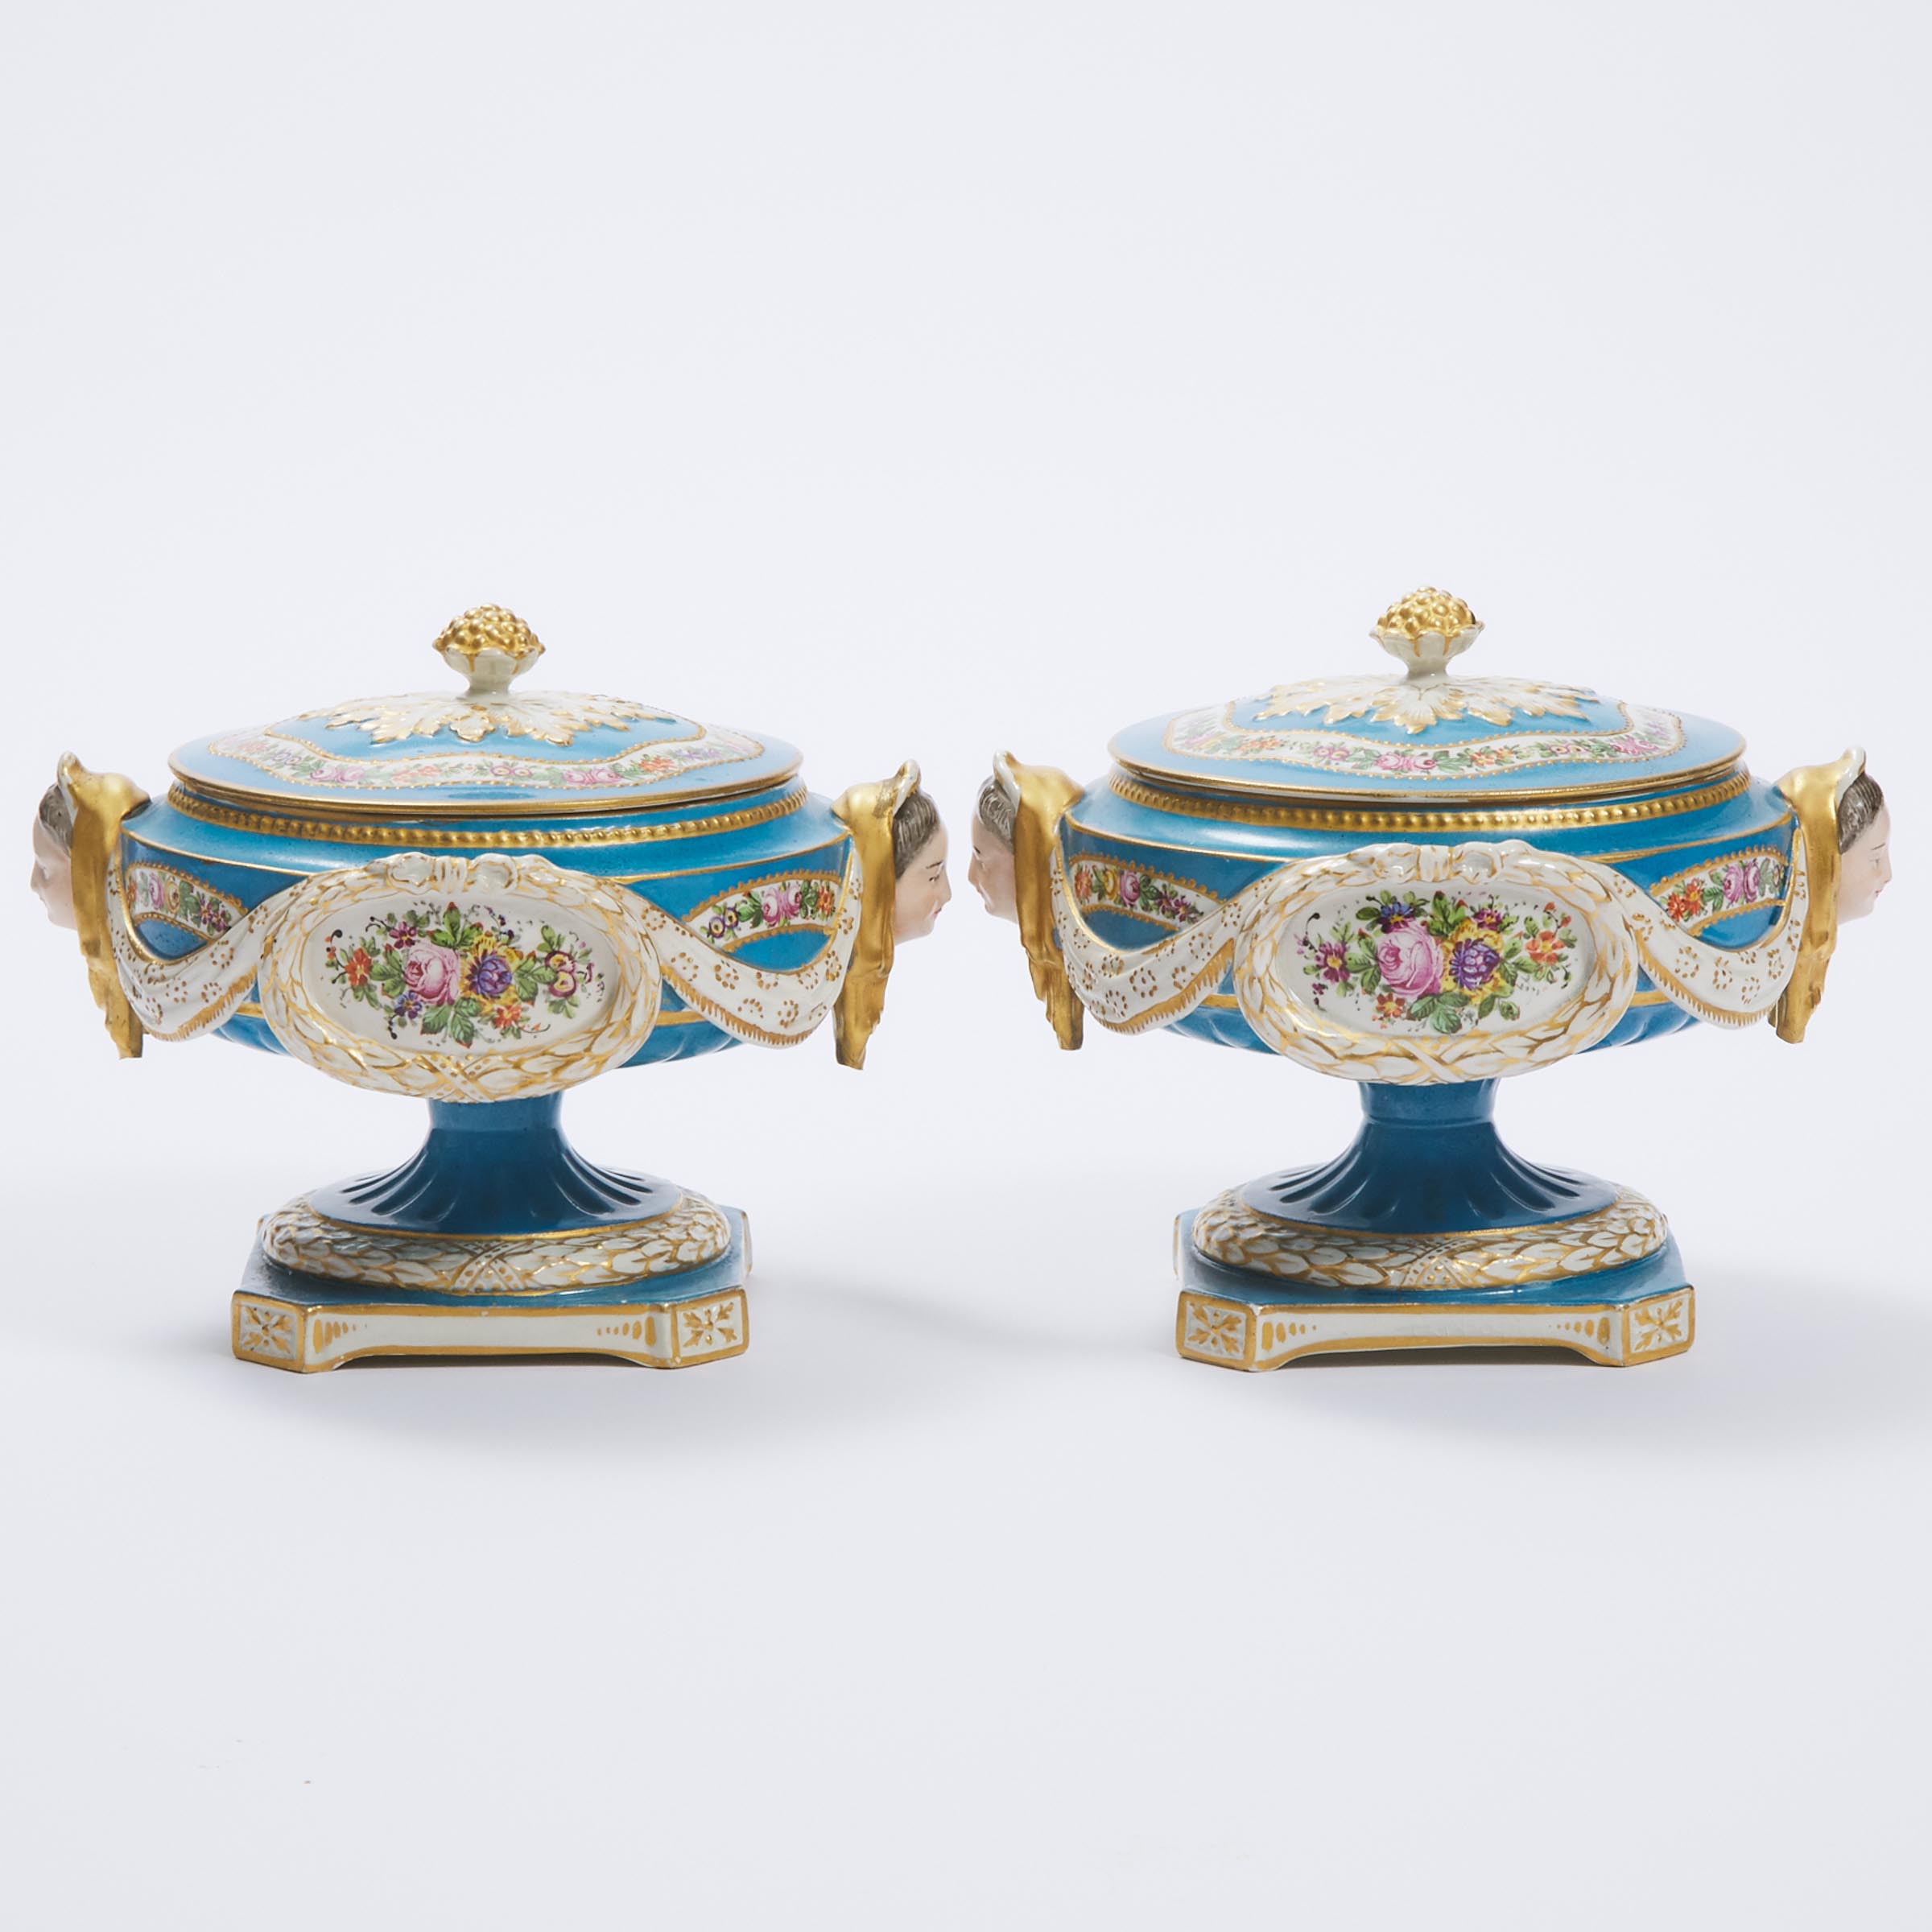 Pair of Sèvres Earthenware Covered